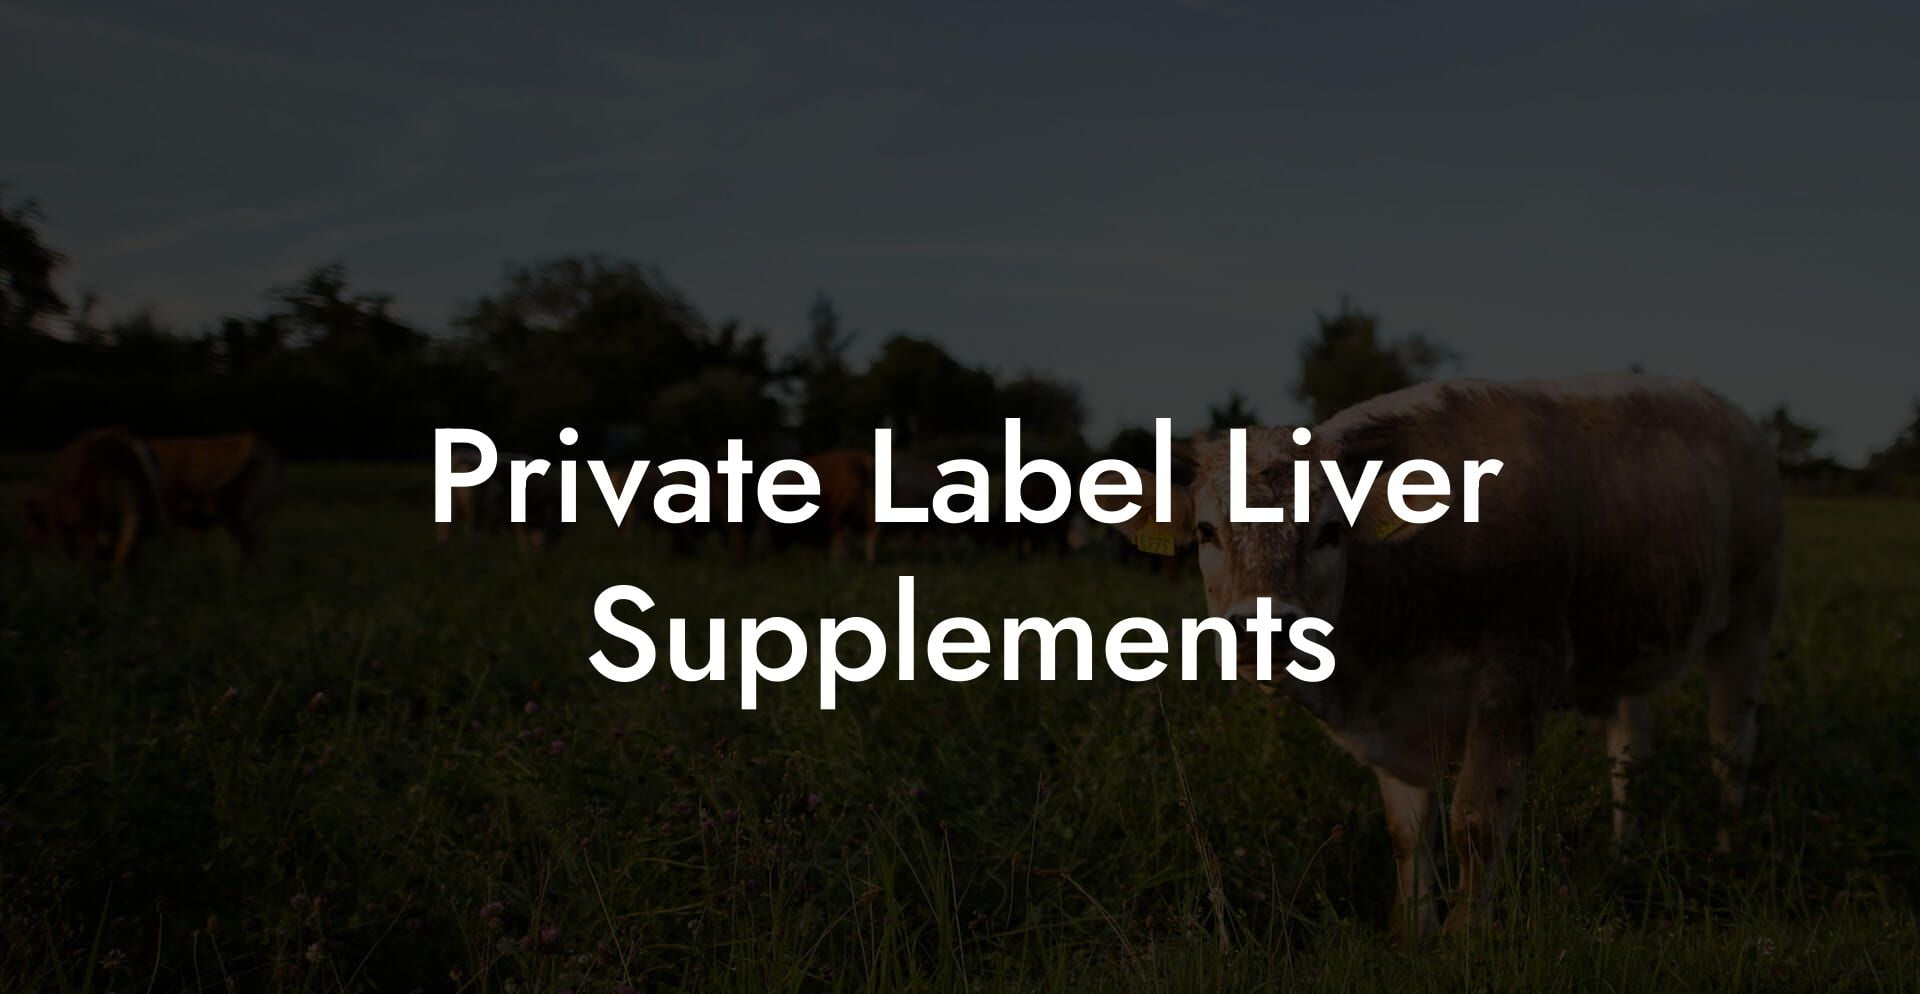 Private Label Liver Supplements